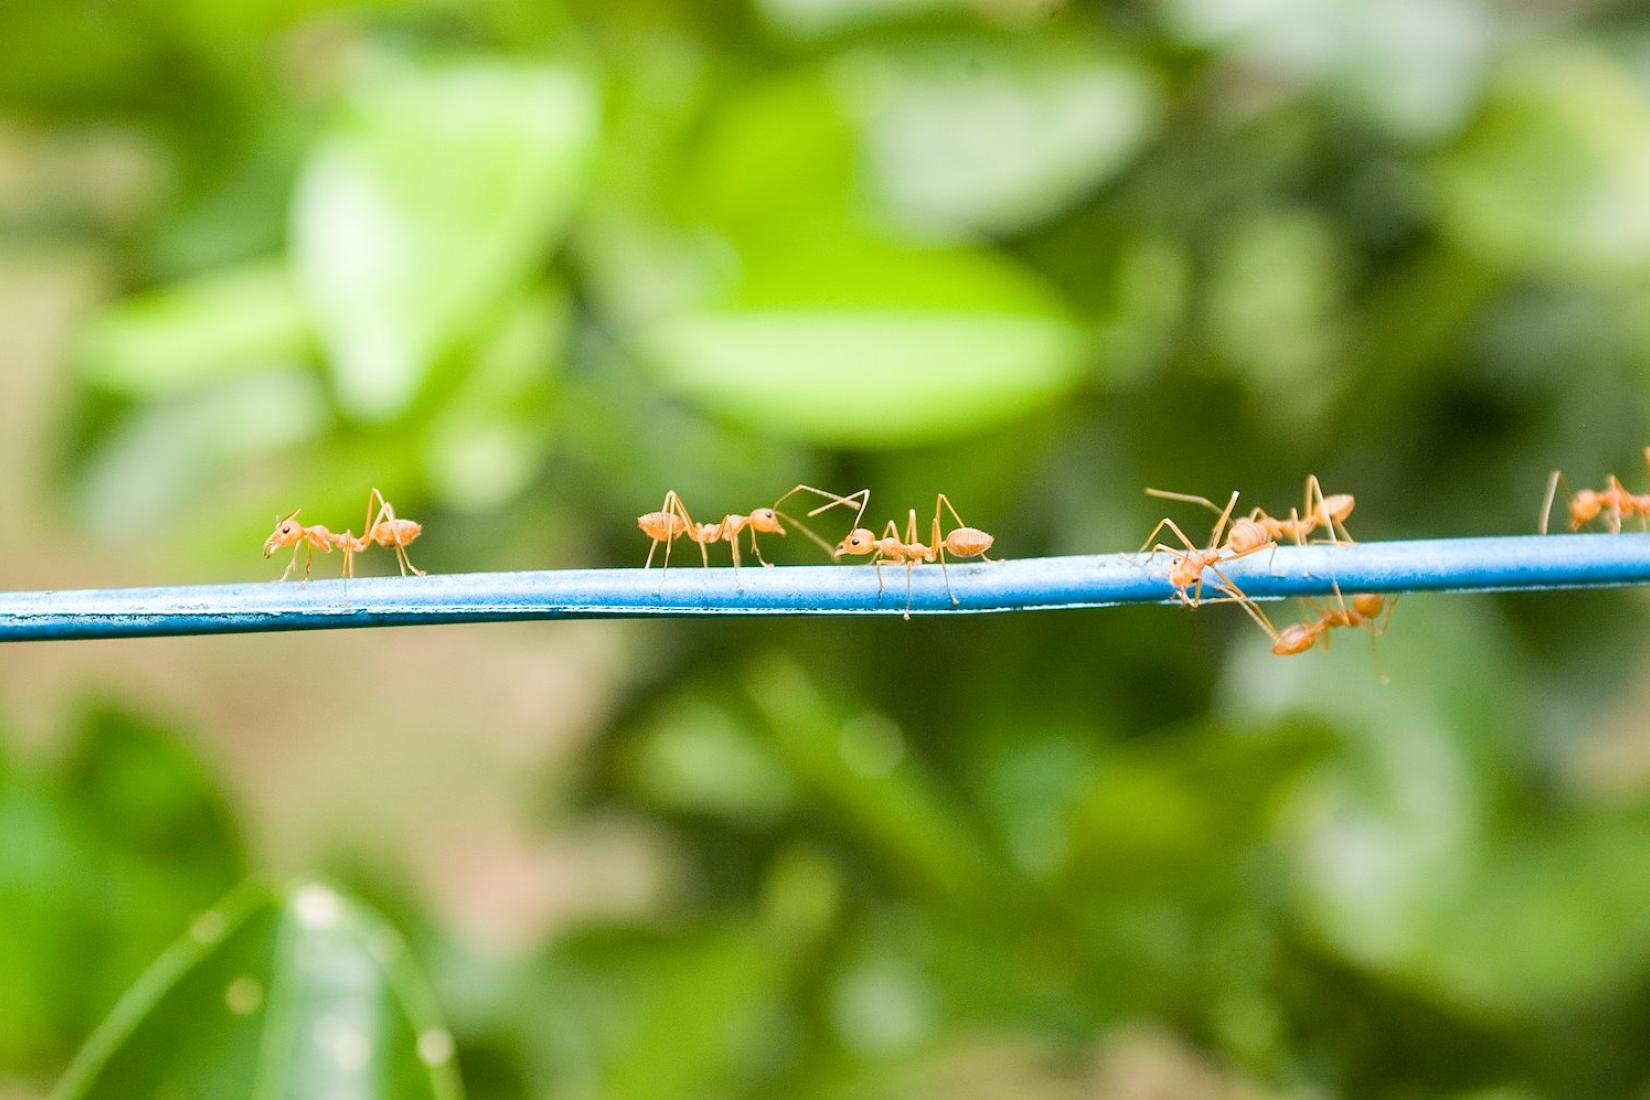 Close up of six ants walking across a wire